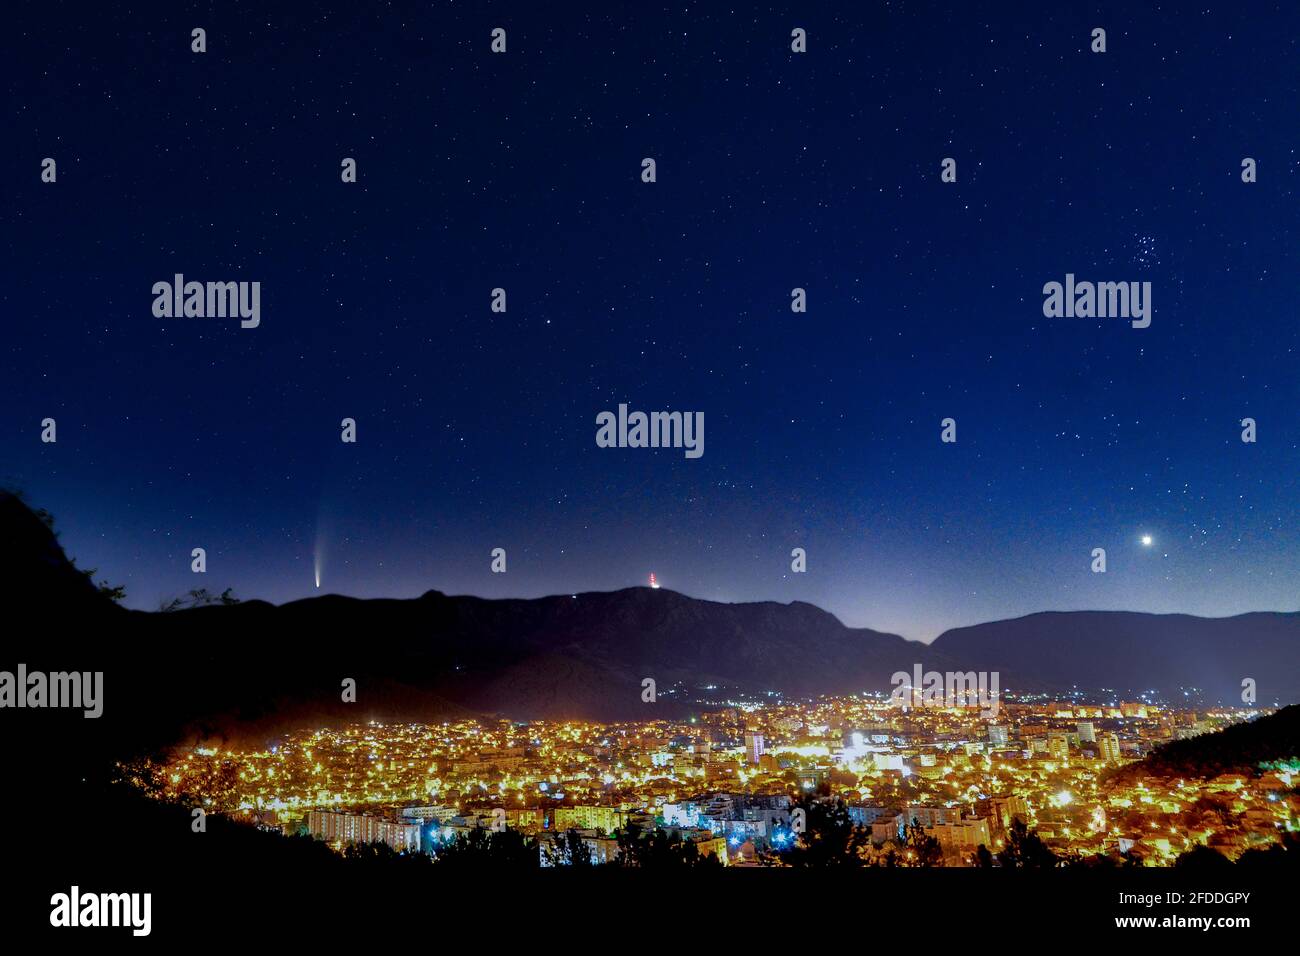 Comet falling in a night sky over a city Stock Photo